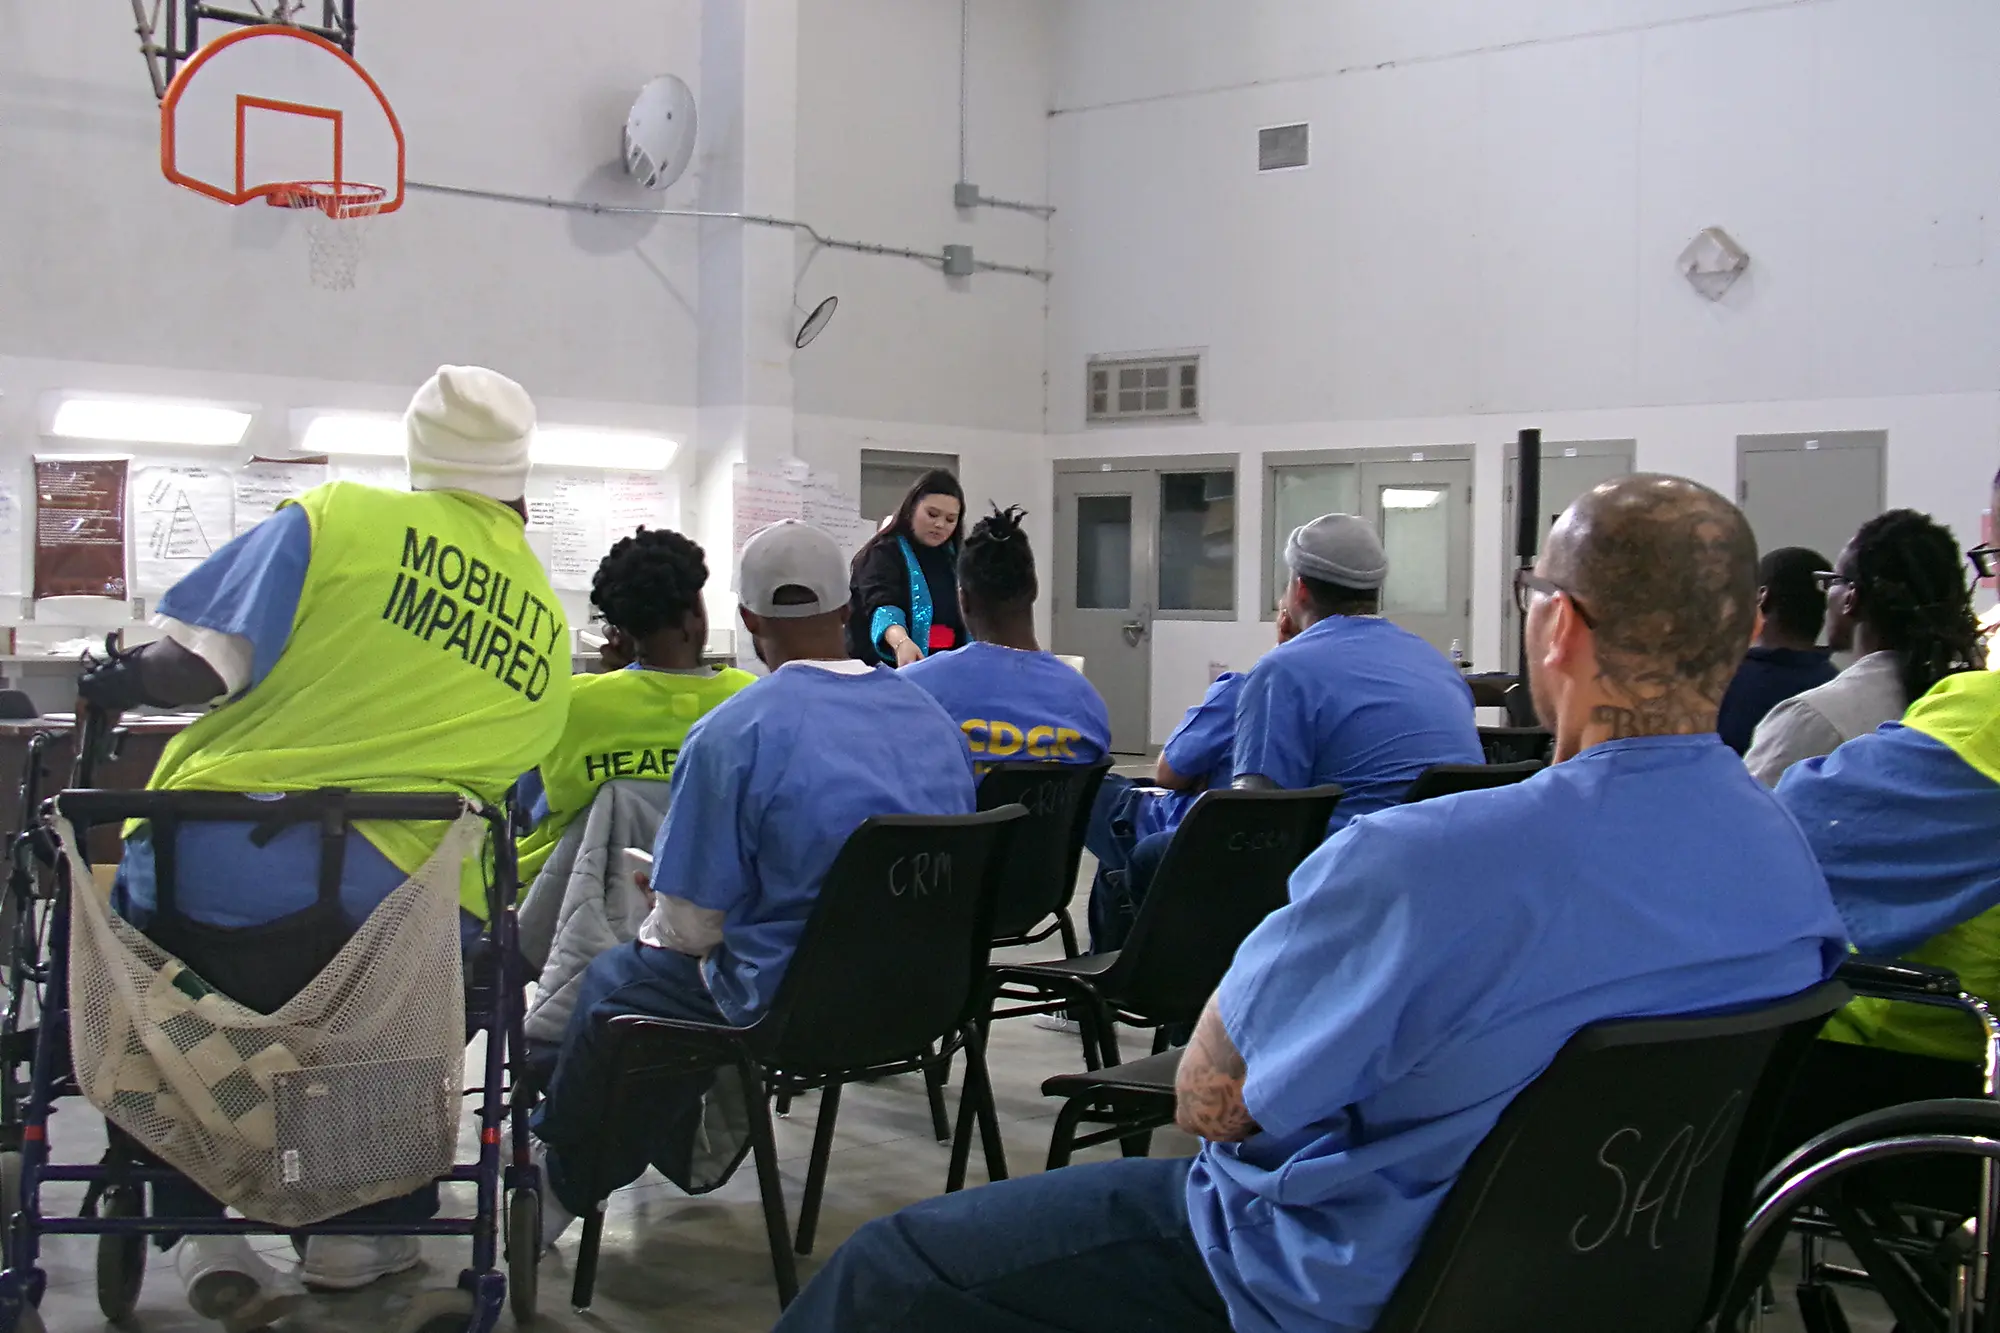 Gaosong Heu performs on a stage in front of a crowd of blue-clad men at Correctional Training Facility in California.